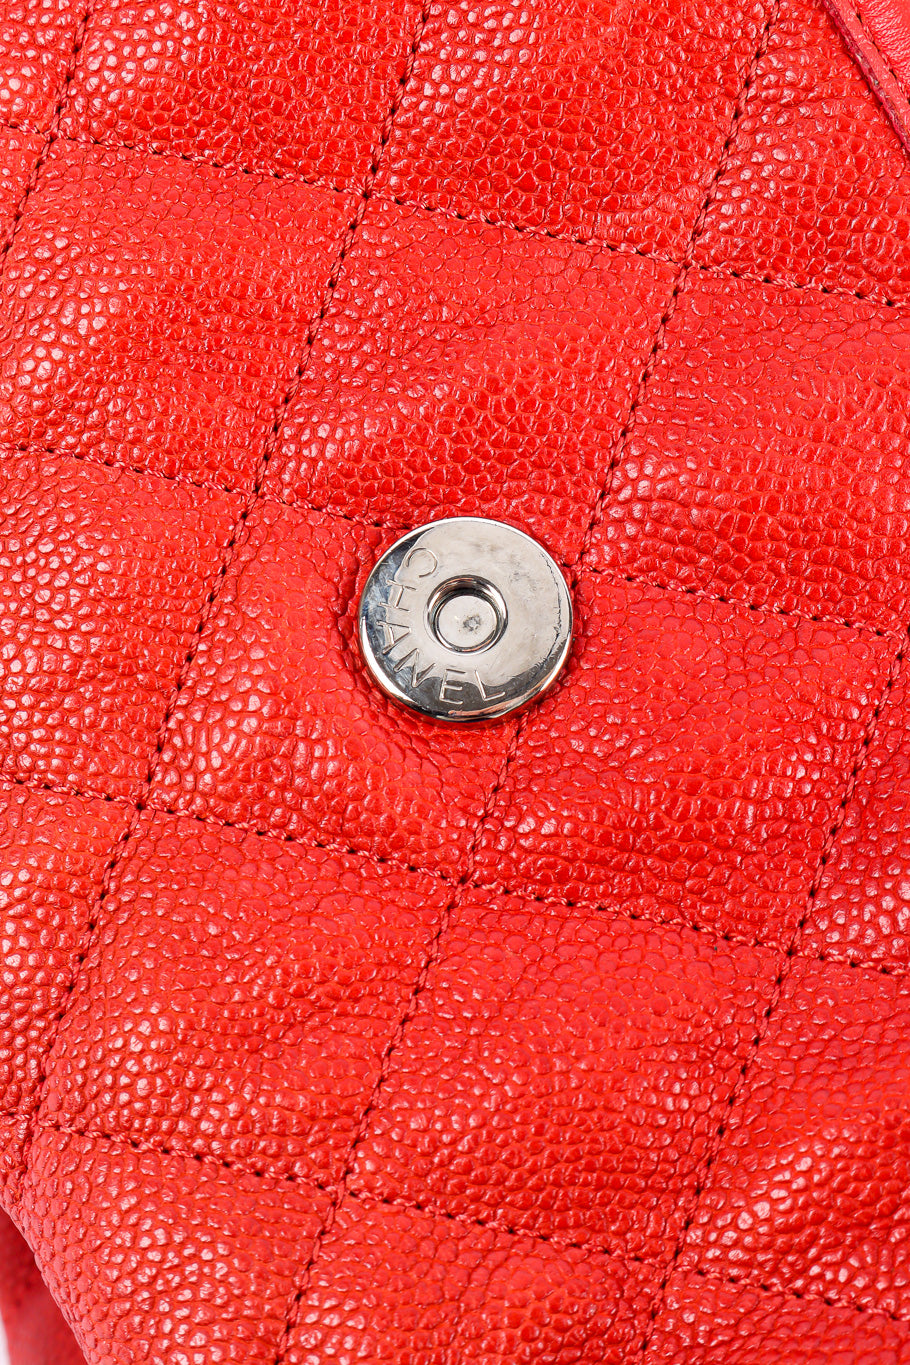 French riviera quilted hobo bag clasp detail @recessla